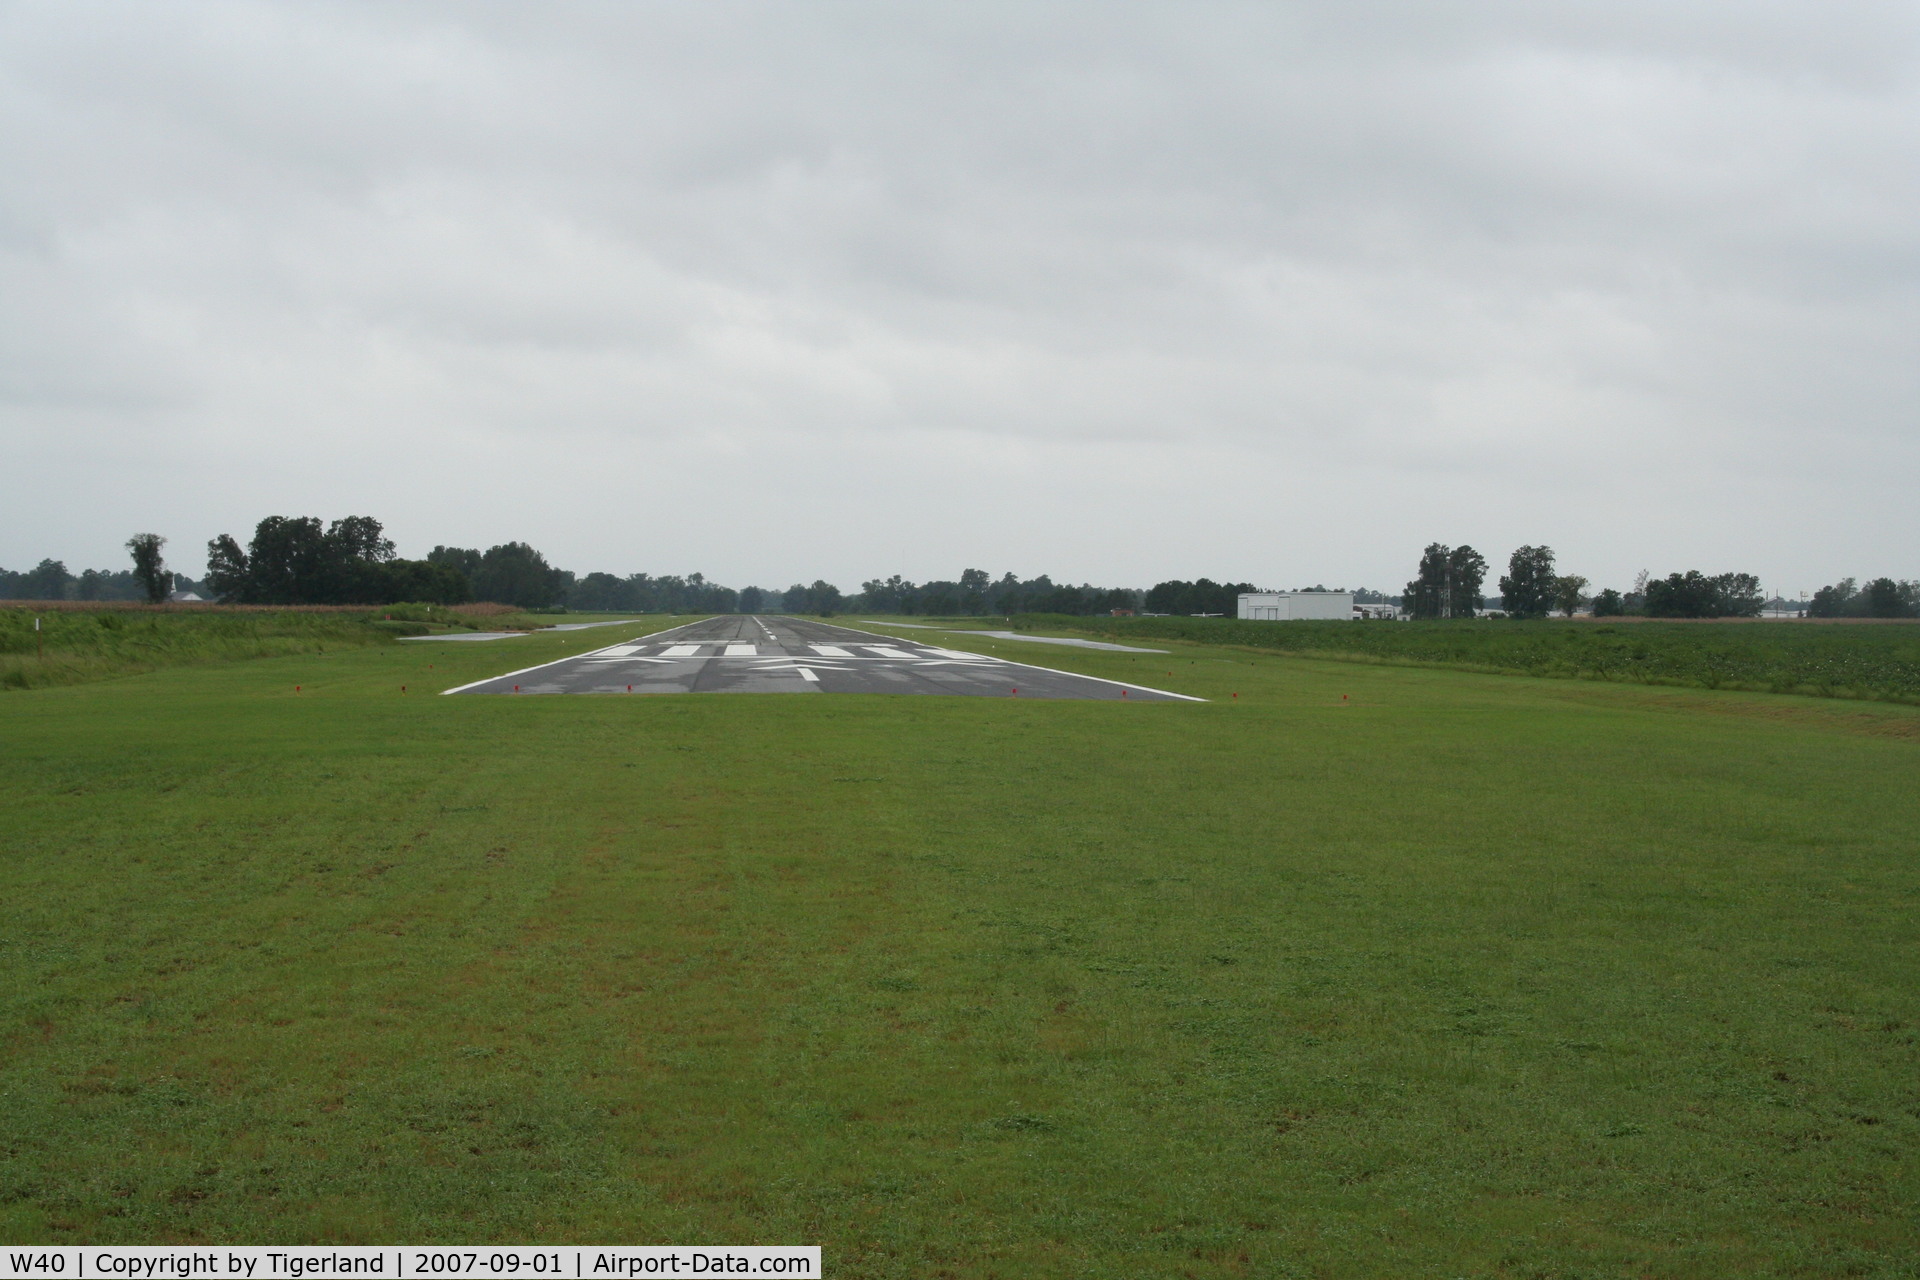 Mount Olive Municipal Airport (W40) - The staff of Bass Avation were friendly.  This is a nice counrty airport.